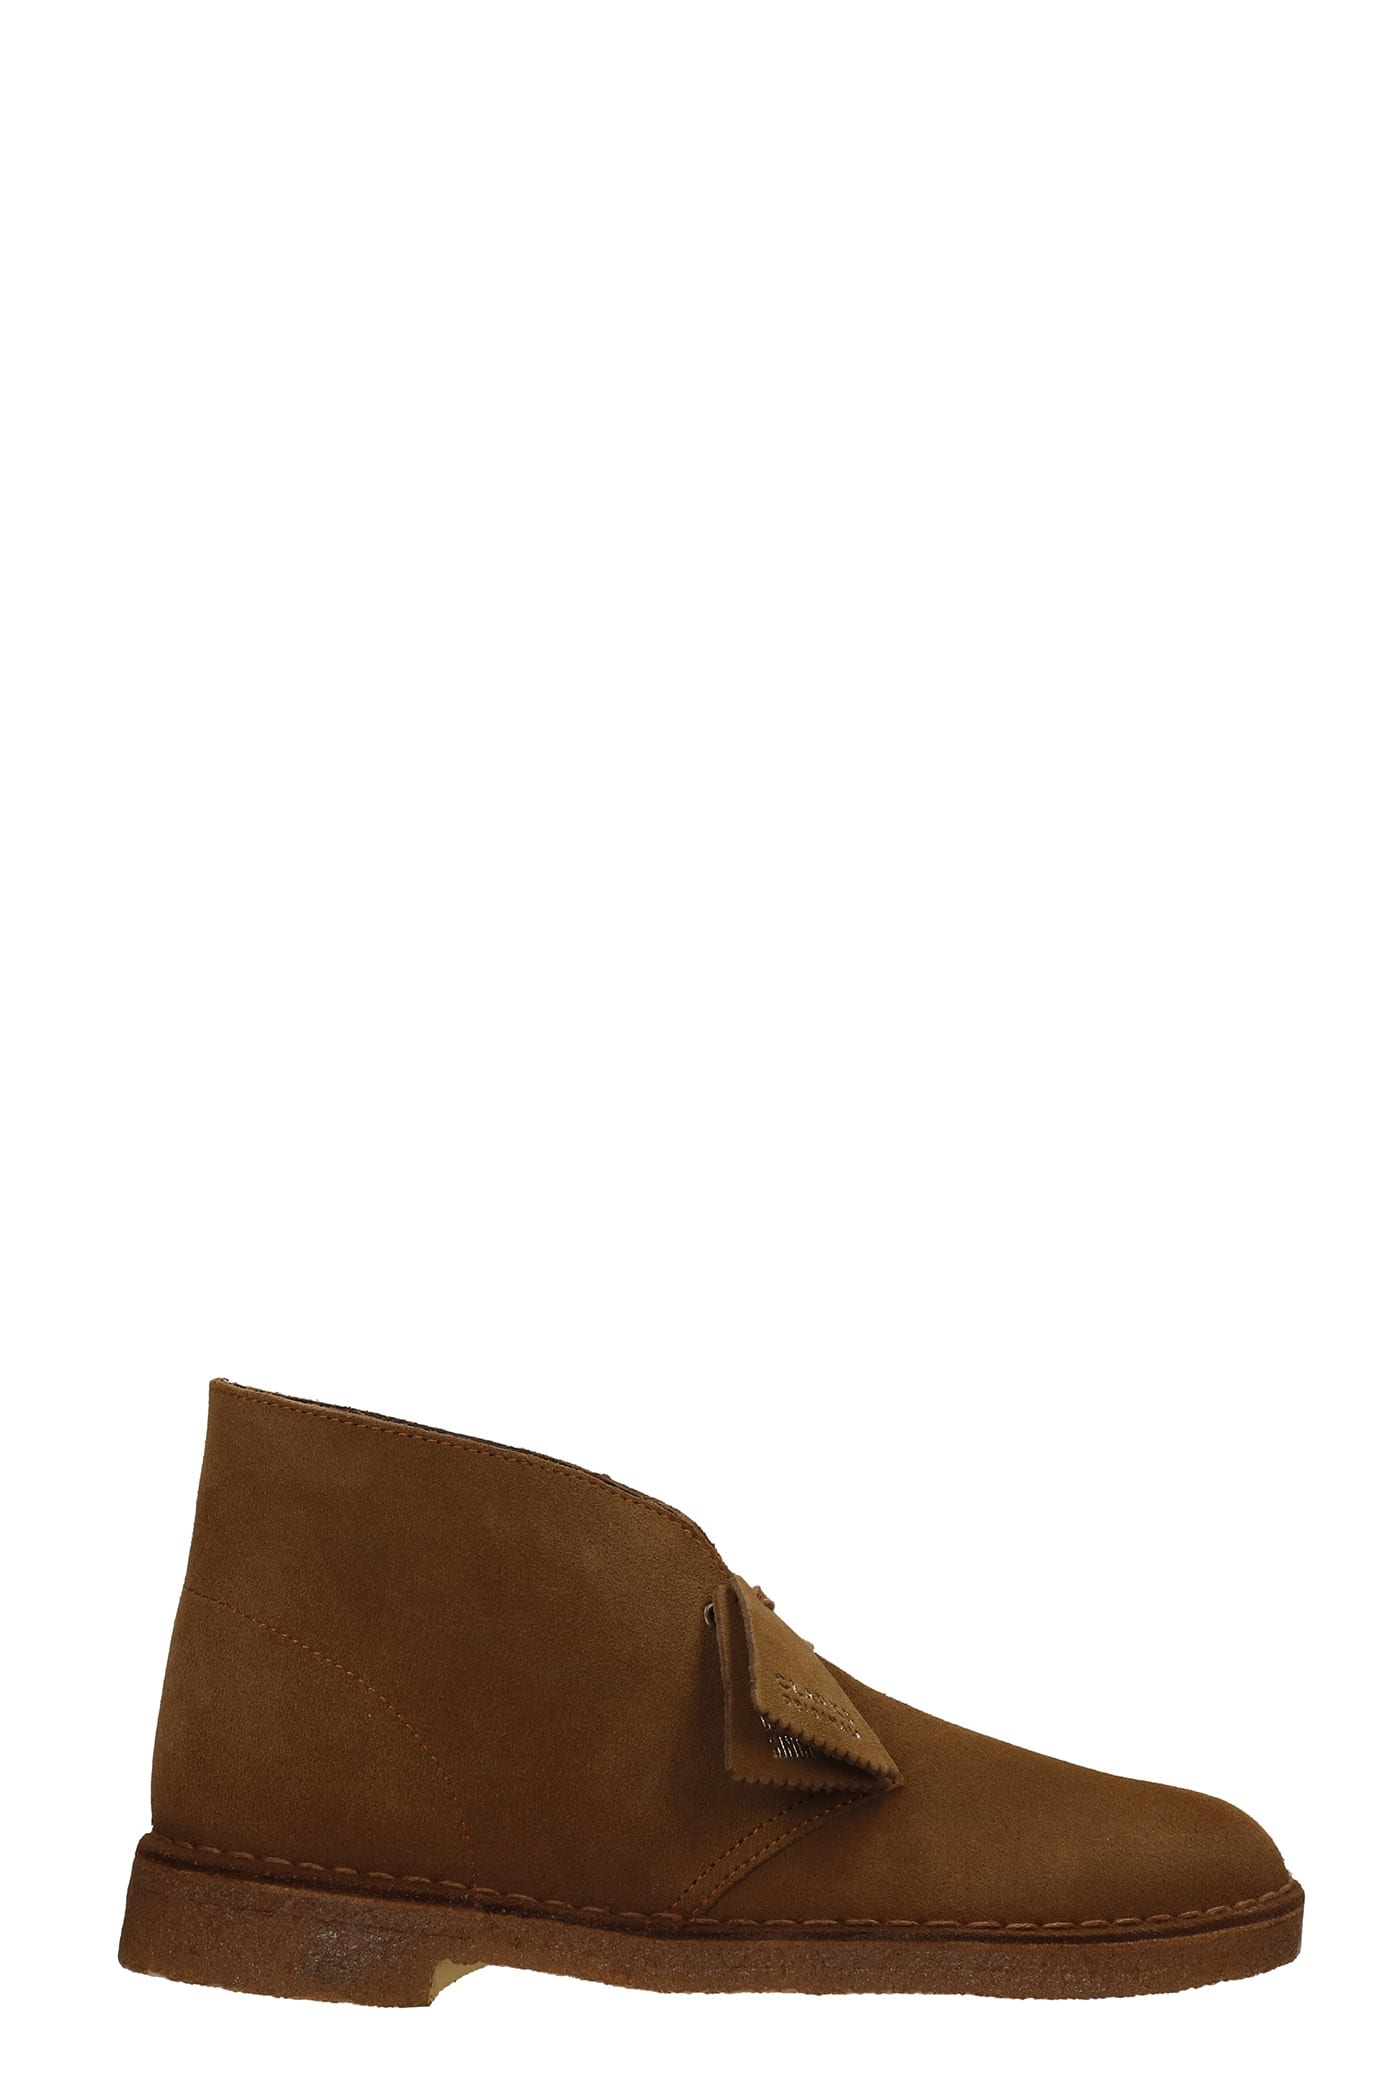 Clarks Desert Boot M Lace Up Shoes In Leather Color Suede